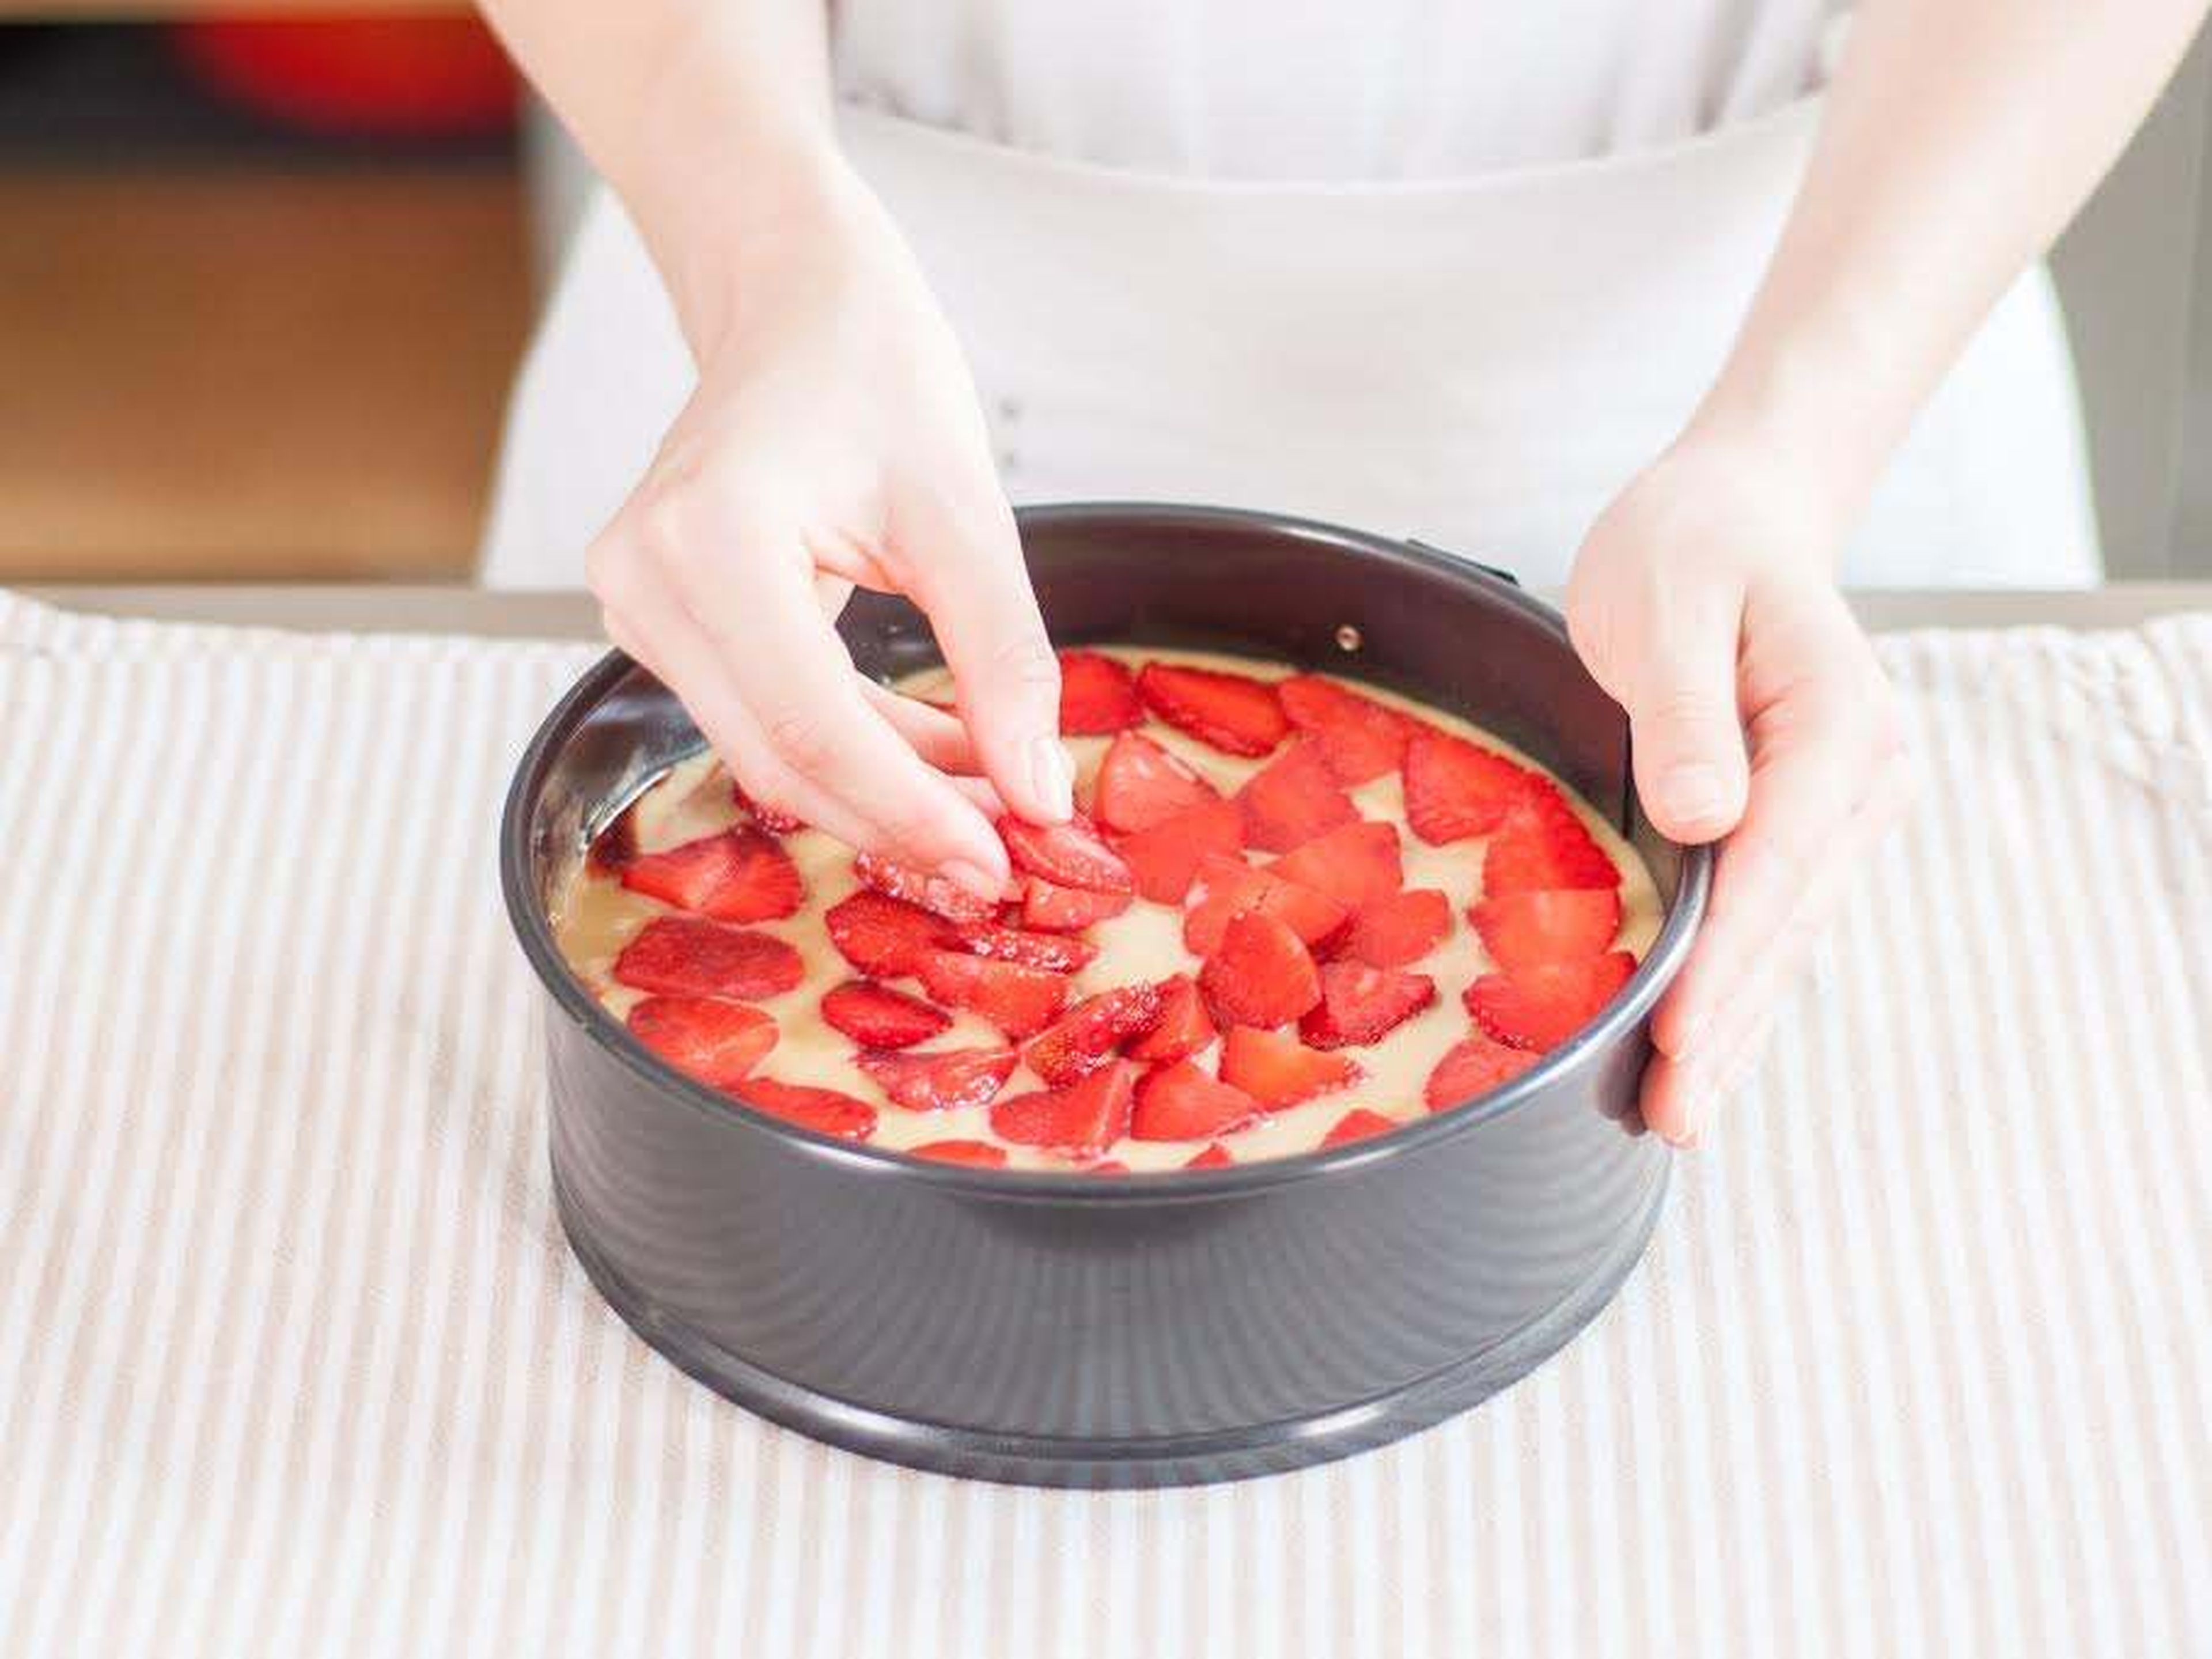 Top with second half of batter, then arrange sliced strawberries on top in concentric circles. Bake for approx. 45 min. – 1 hour at 175°C/350°F, or until a toothpick inserted into center of cake comes out clean or with a few moist crumbs.